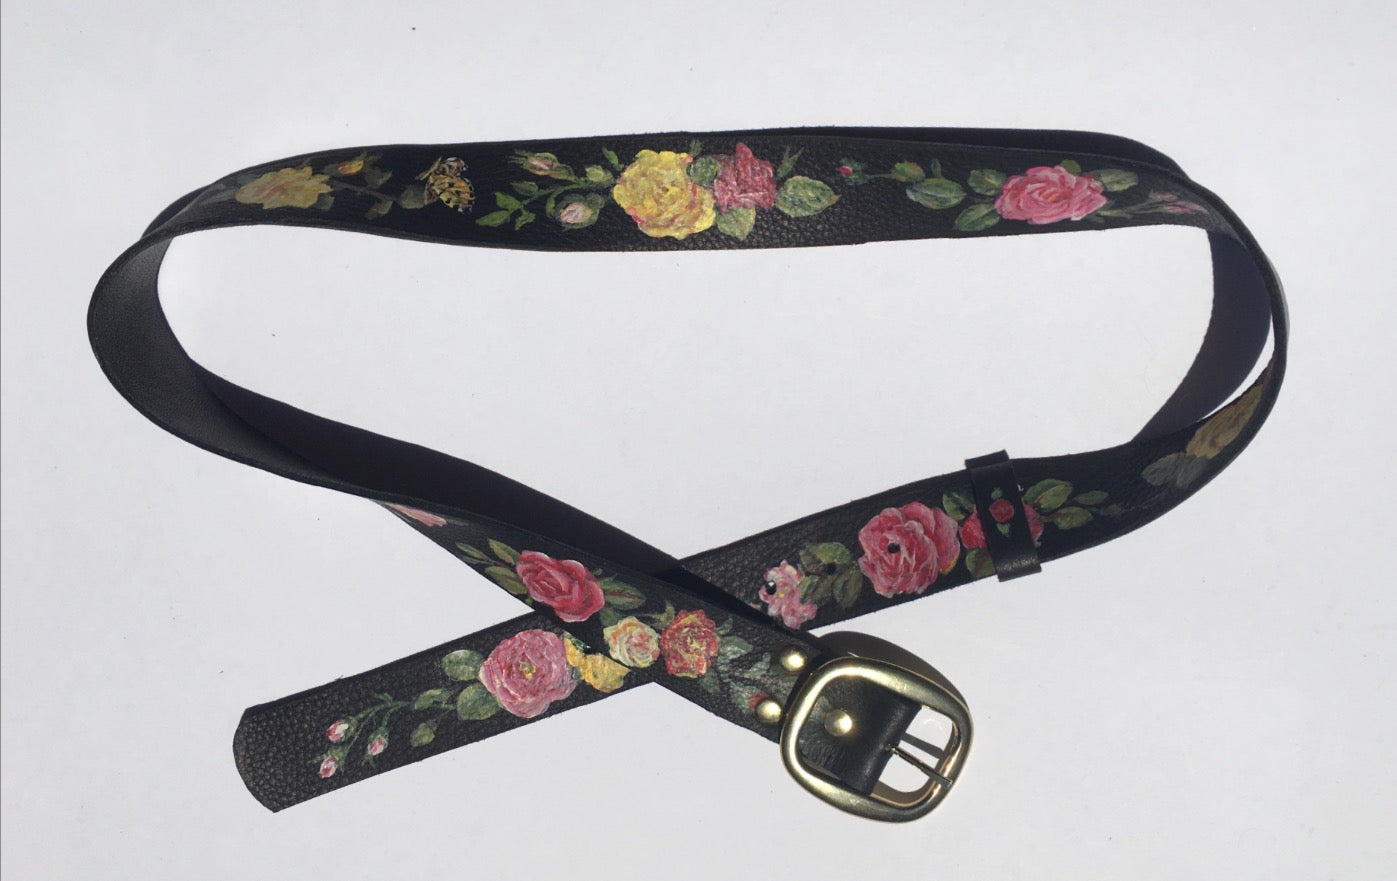 Handmade & Hand-Painted Black Leather Belt with Roses